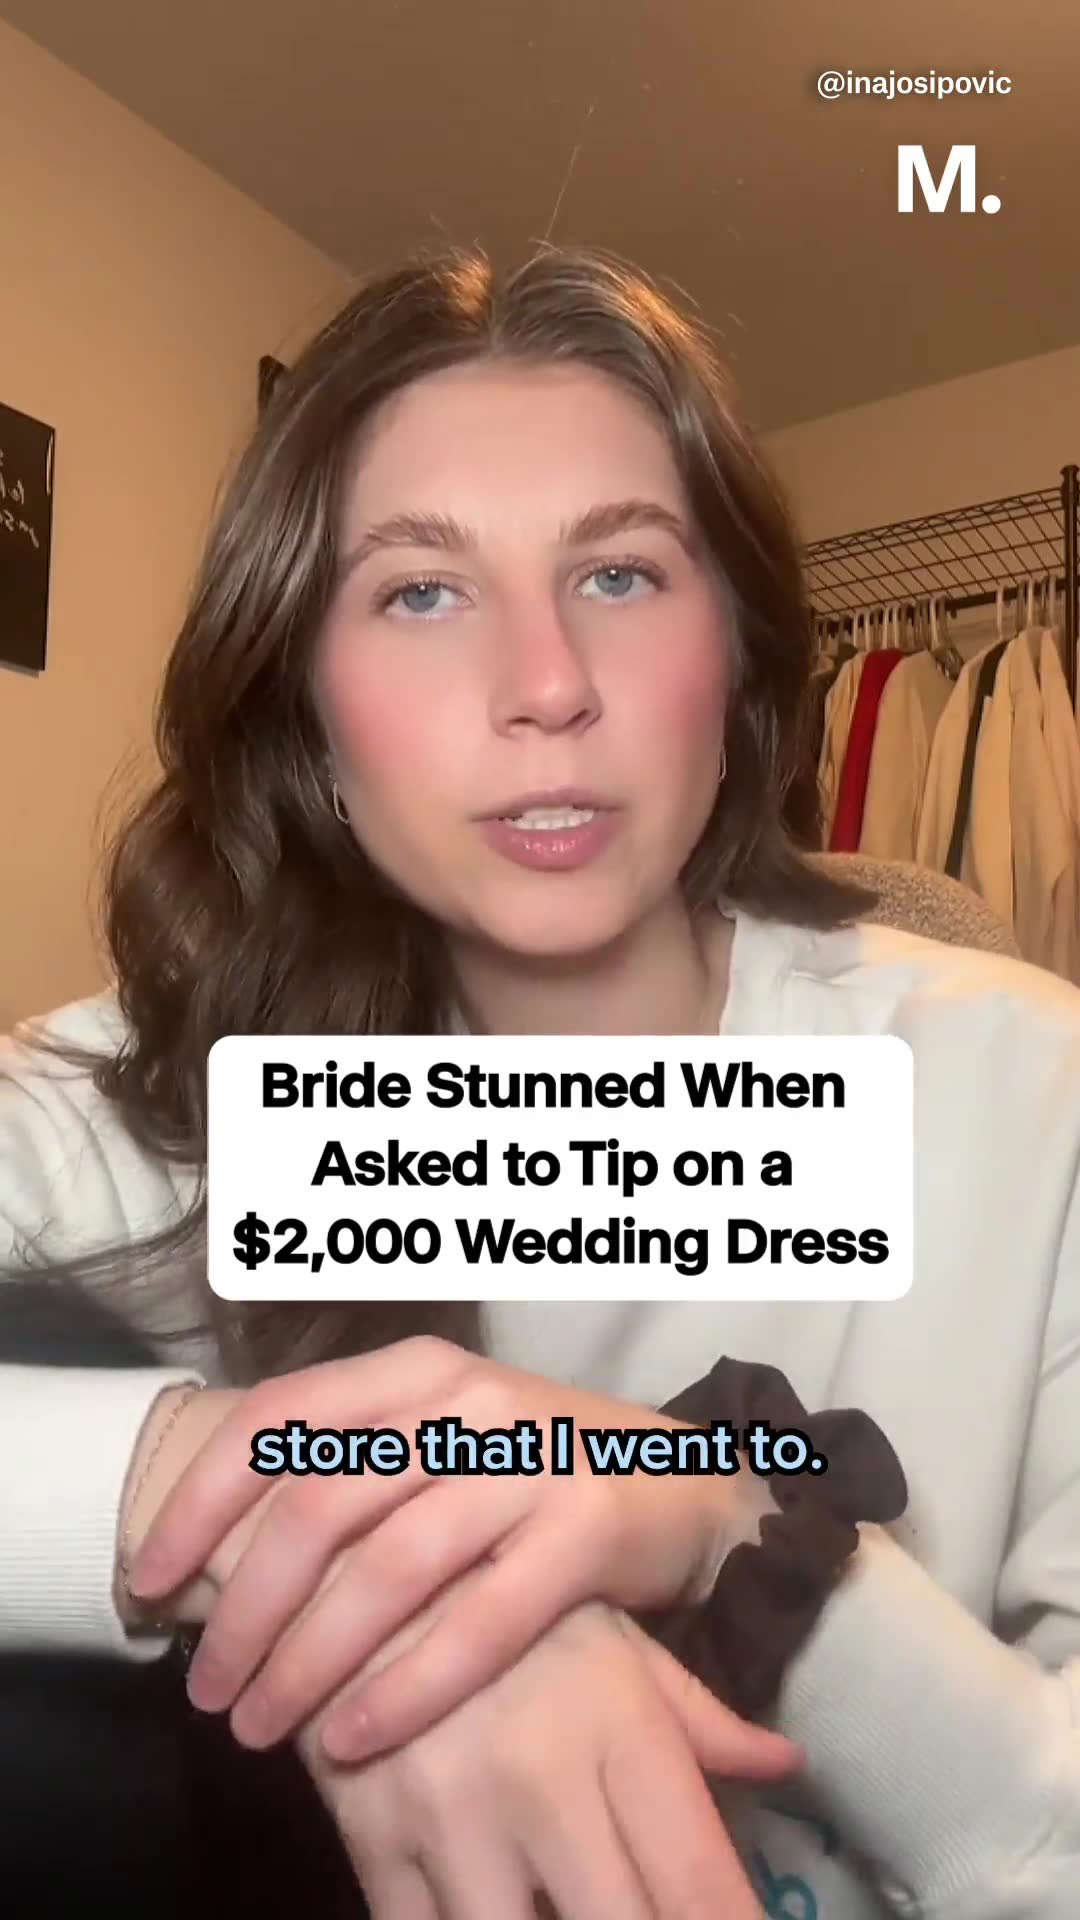 Bride Stunned When Asked to Tip on a $2,000 Wedding Dress Read More: